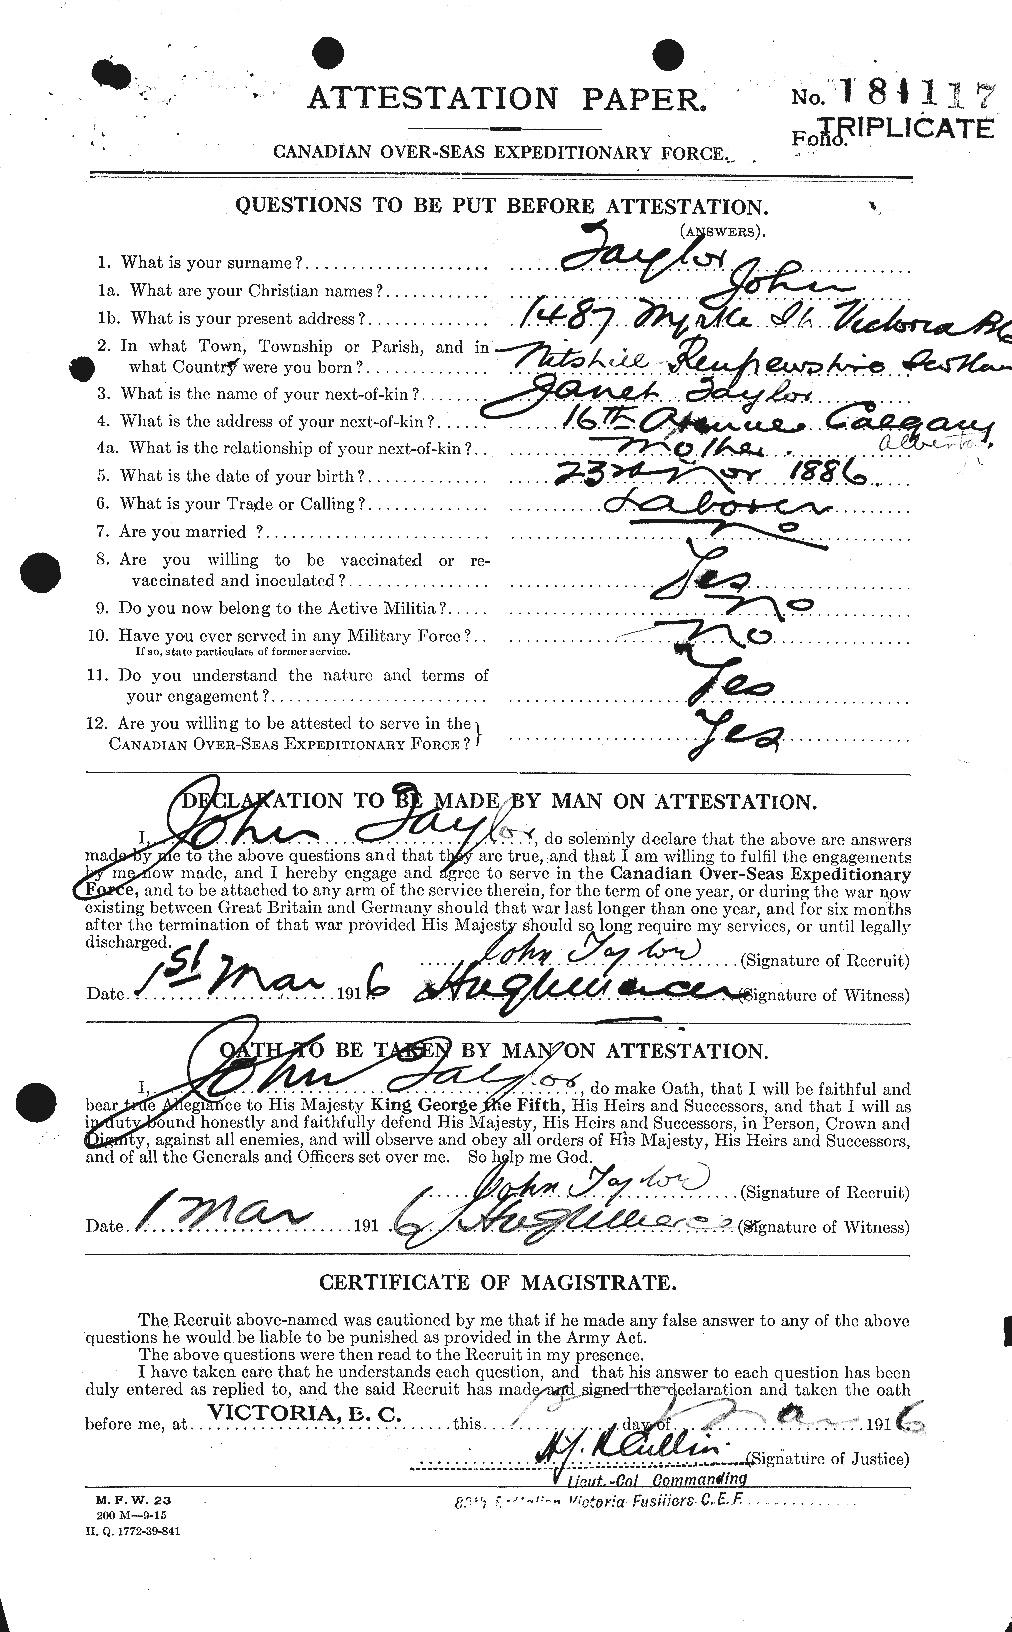 Personnel Records of the First World War - CEF 627015a